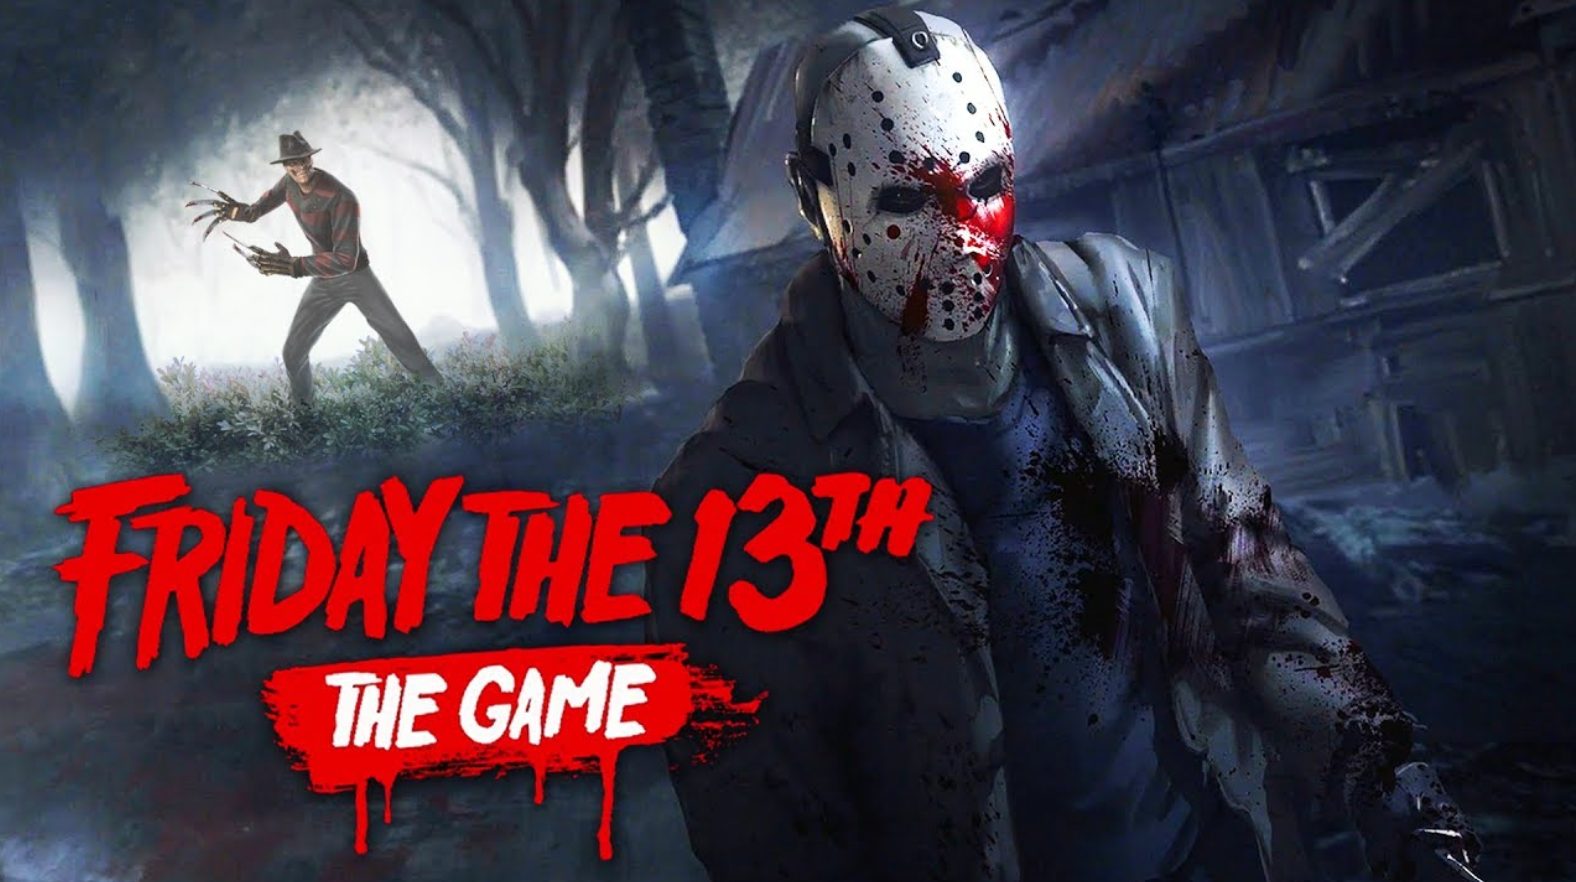 Friday the 13th The Game PC Version Full Game Setup Free Download